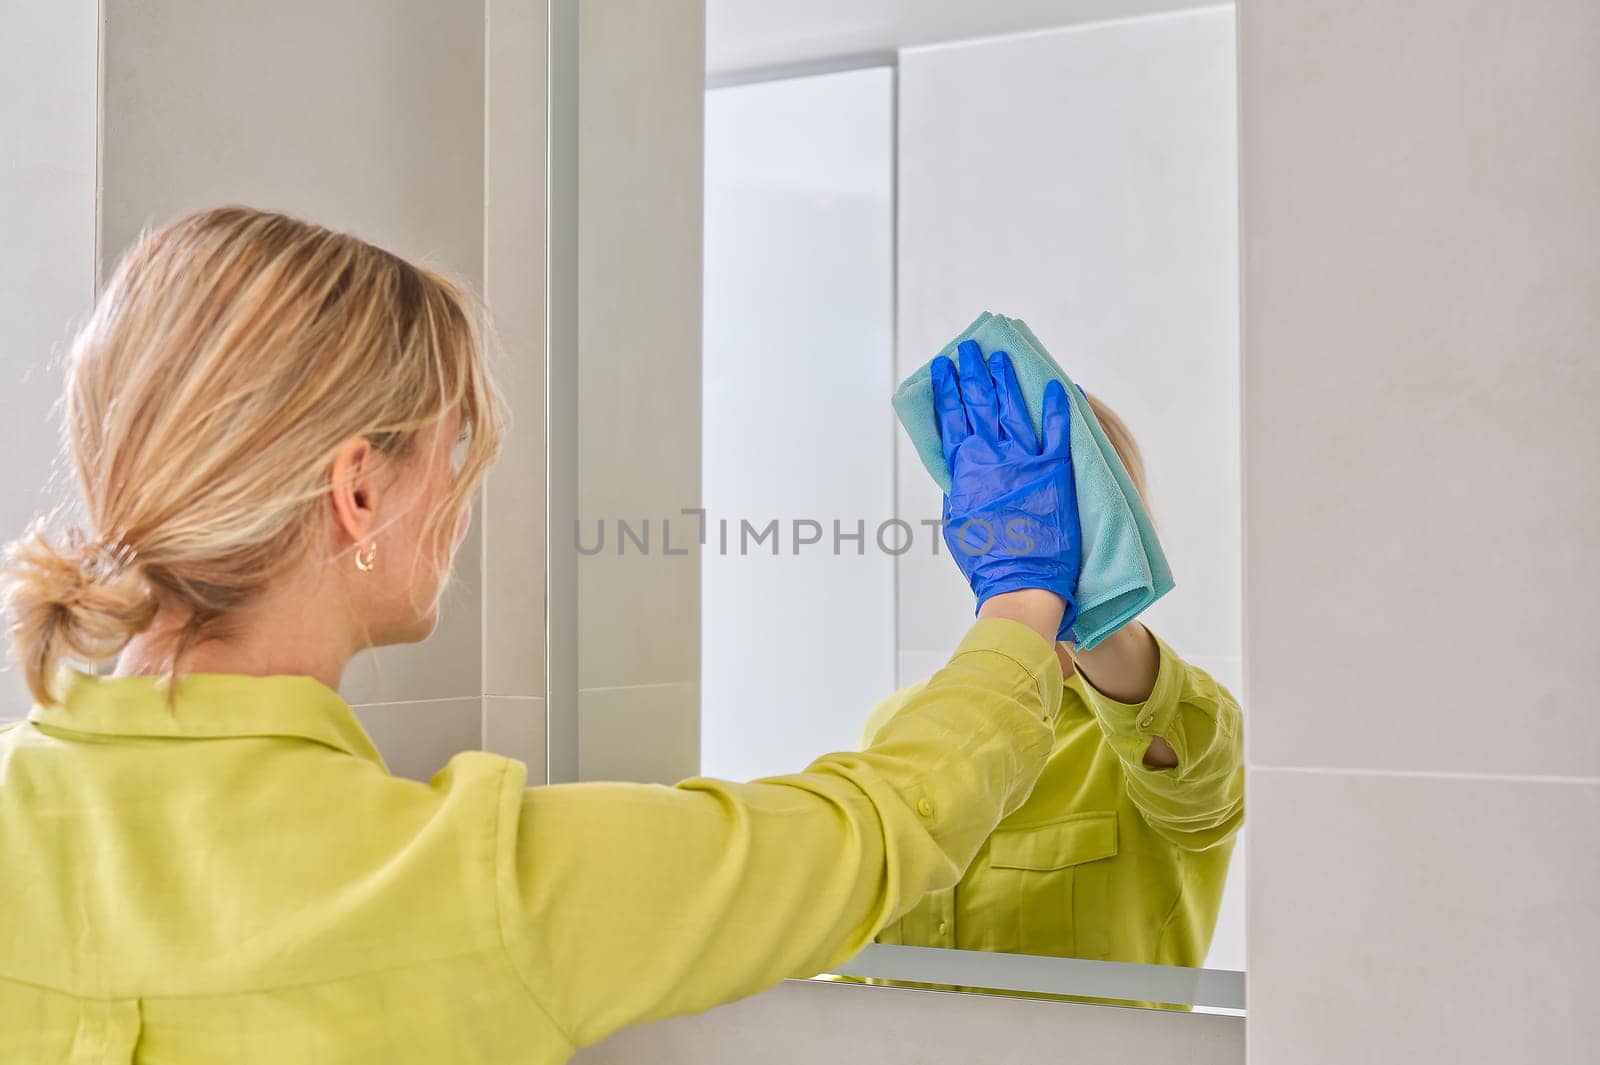 cleaning company. hotel maid microfiber cloth washing cleaning a mirror. household service concept by PhotoTime